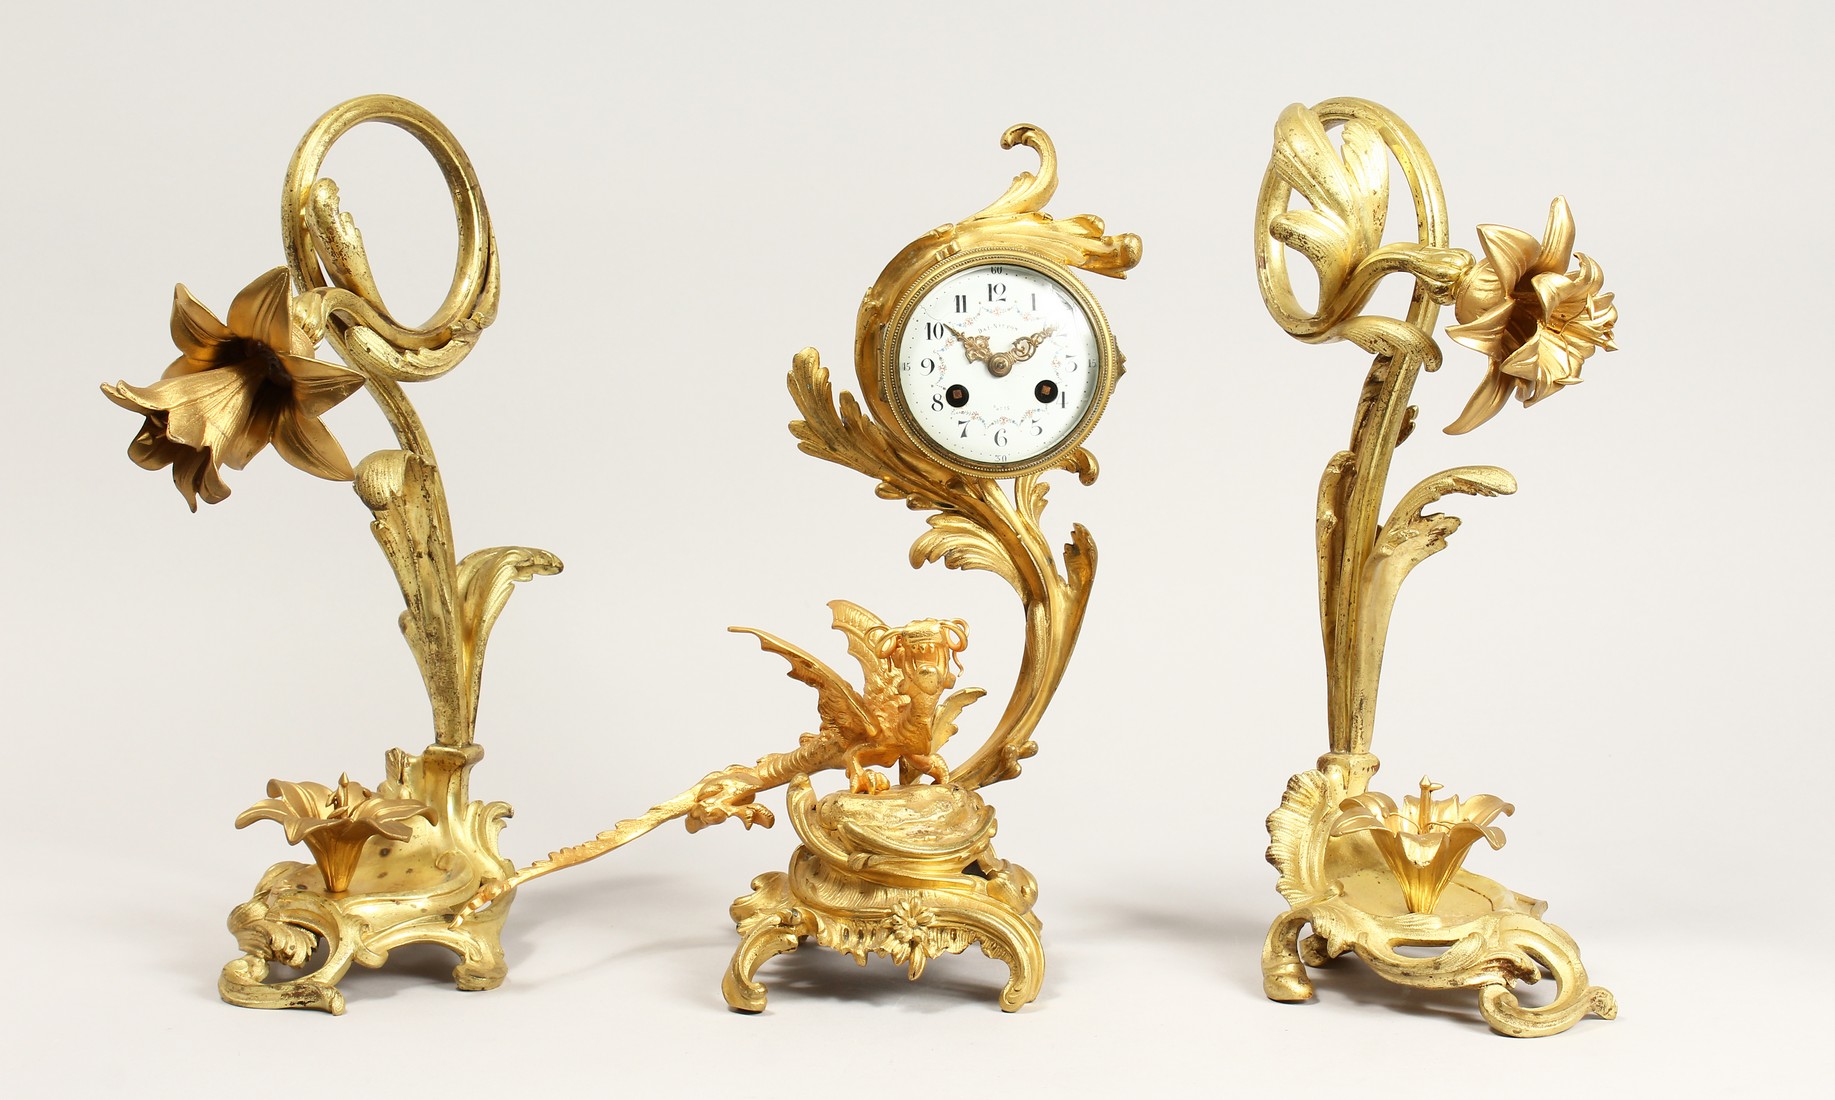 A GOOD FRENCH THREE PIECE ORMOLU CLOCK SET, with drum movement by DAI NIPPON, Paris, with acanthus